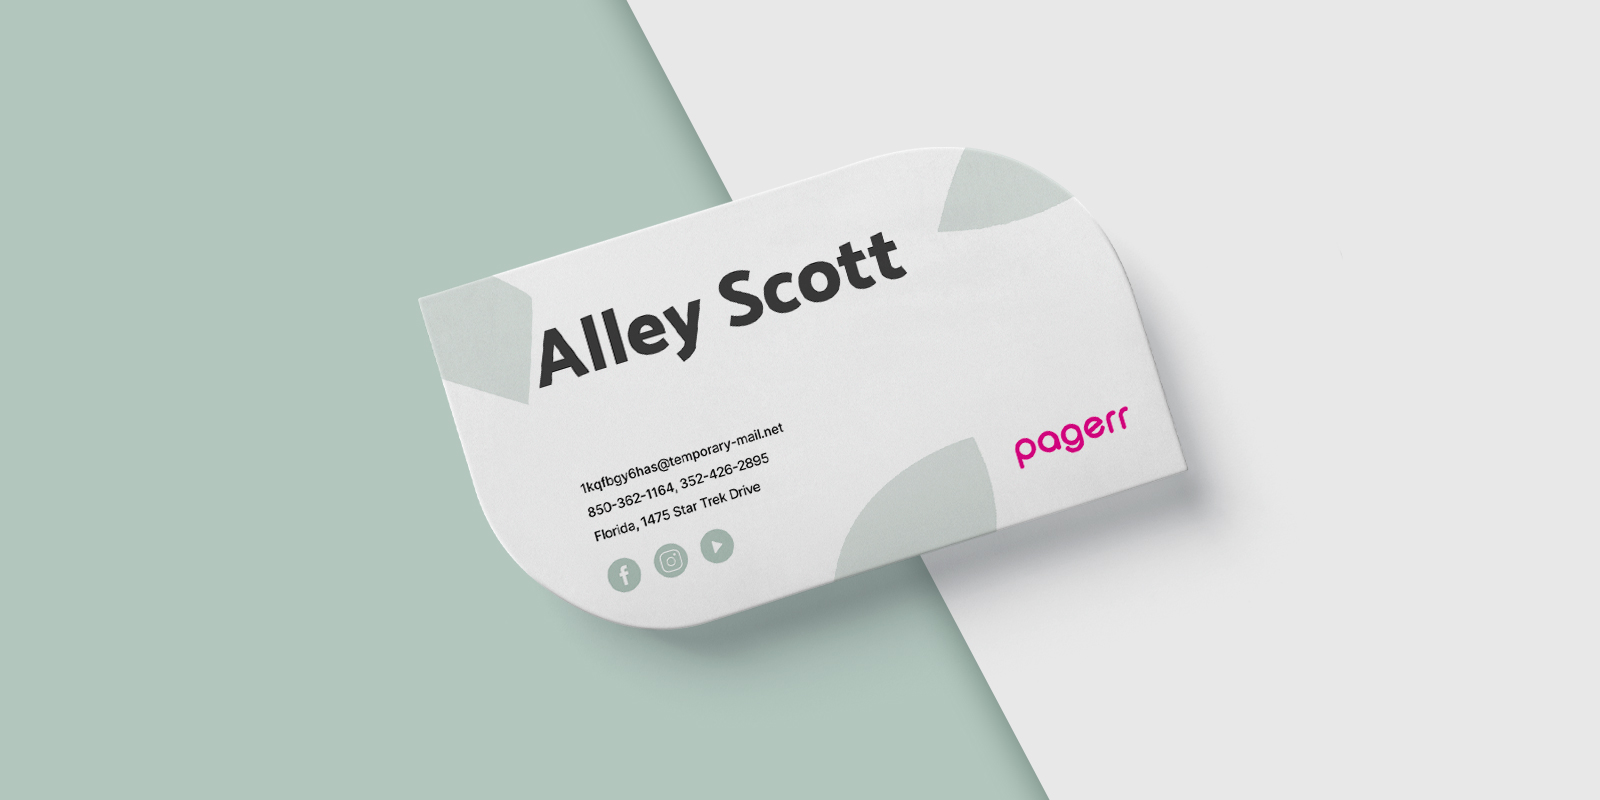 Special shape business cards in Toowoomba - Print with Pagerr